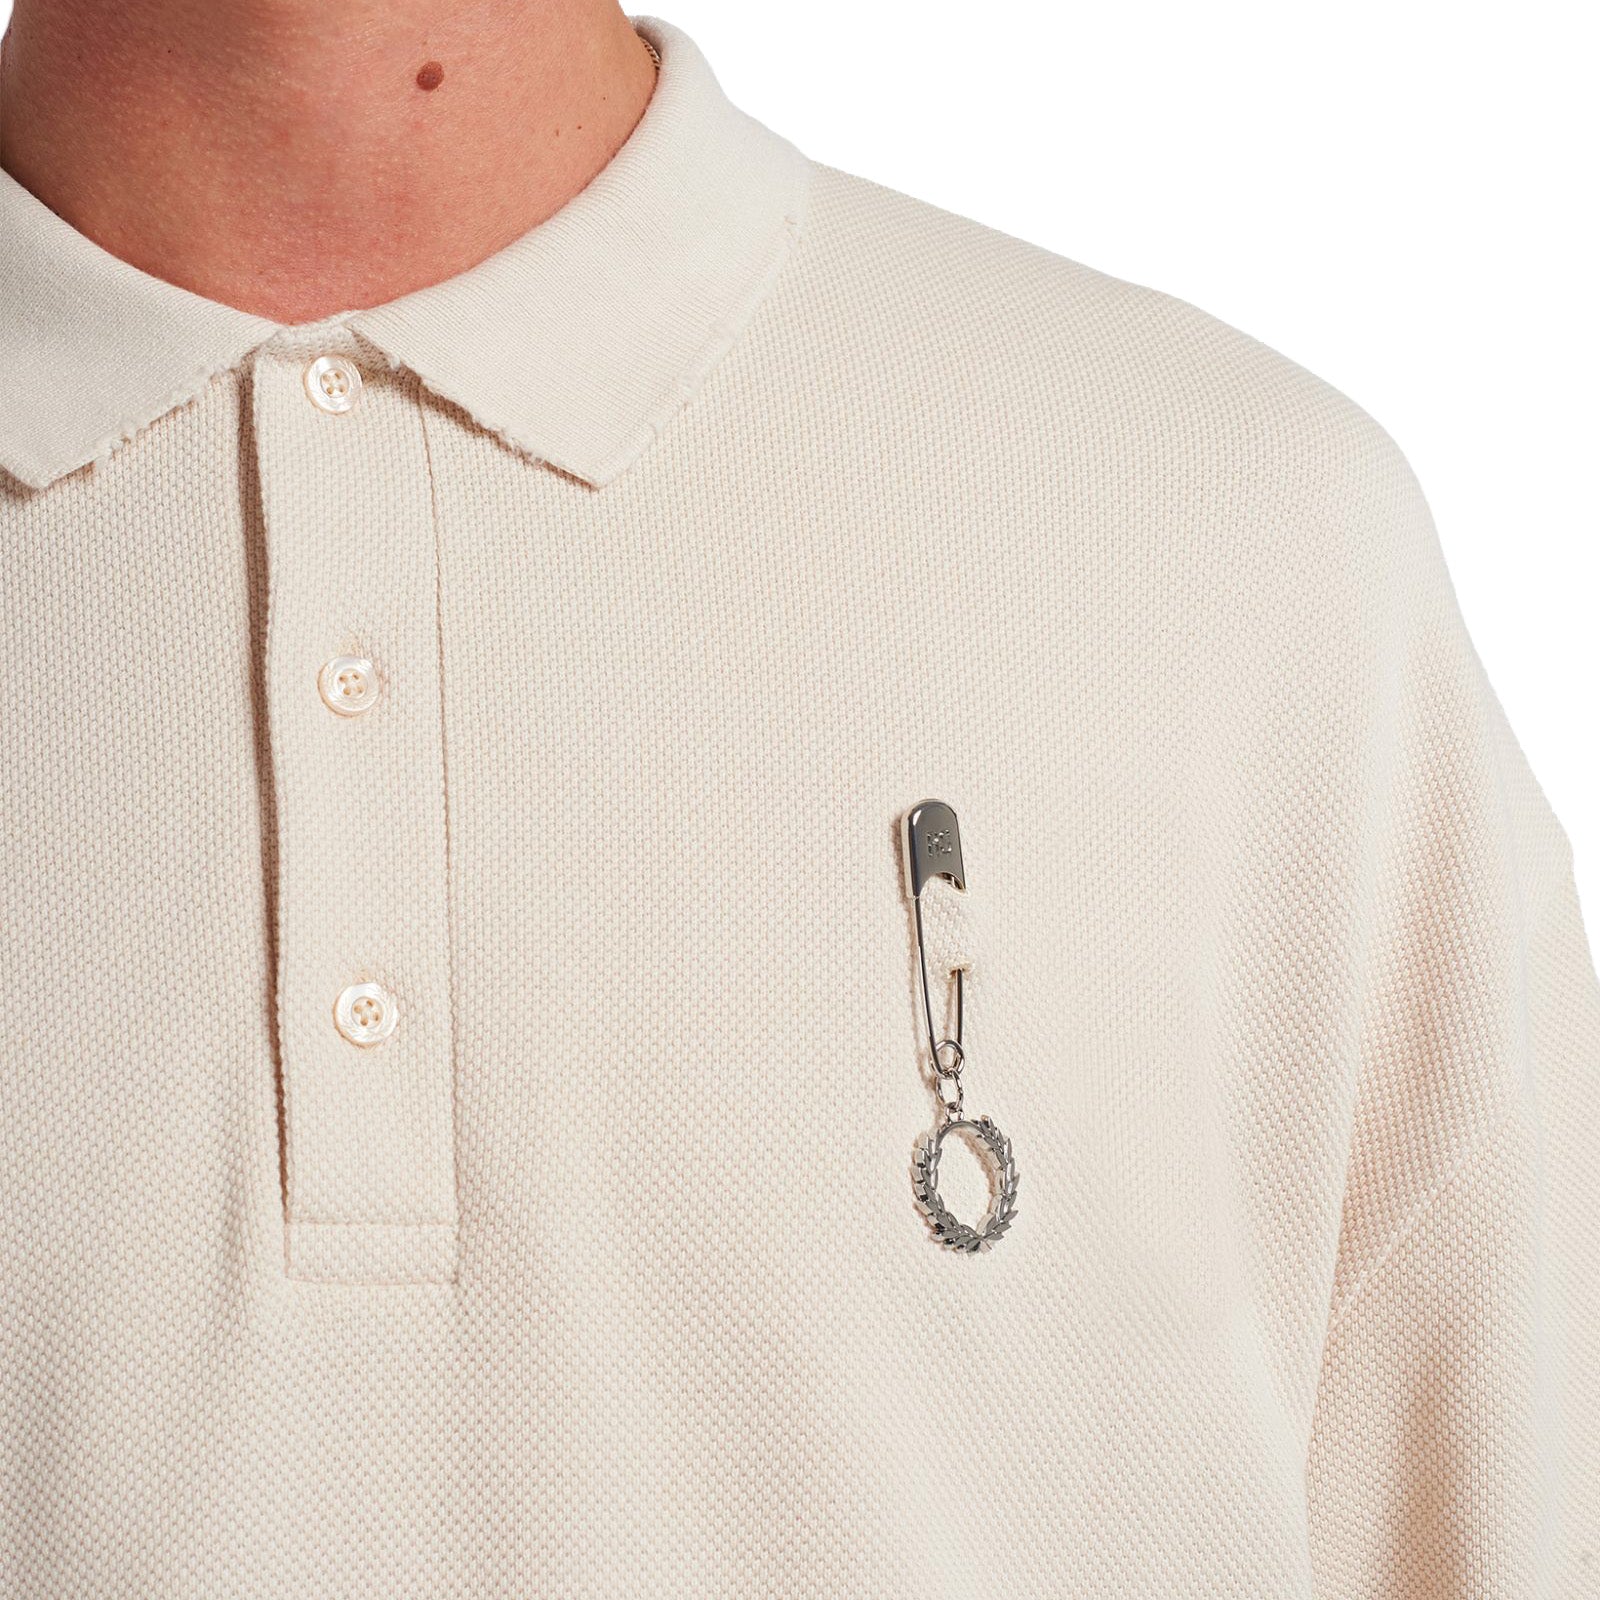 Fred Perry x Raf Simons Oversized Distressed Polo Cream